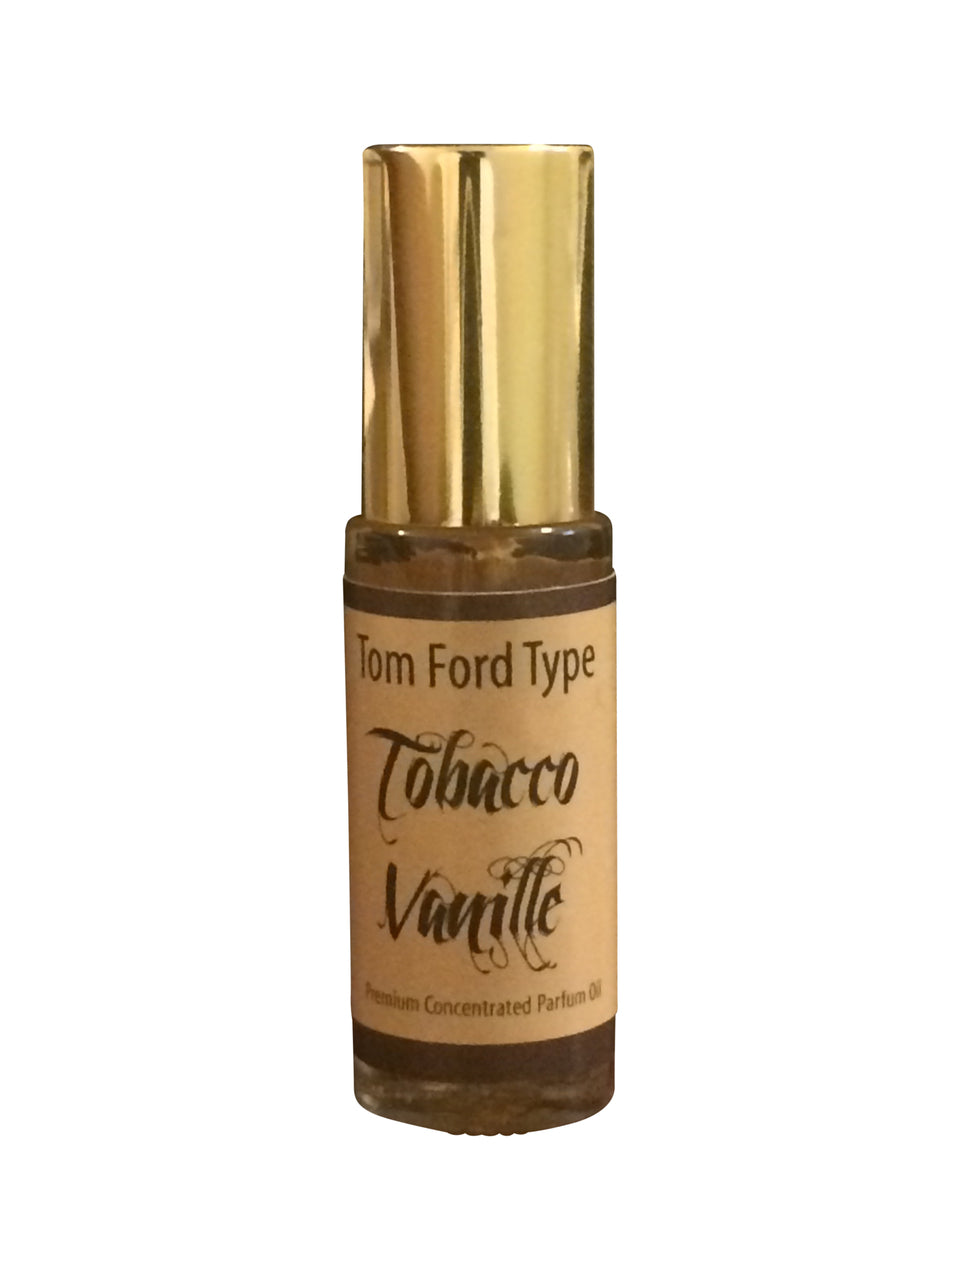 Tom Ford Tobacco Vanille Type